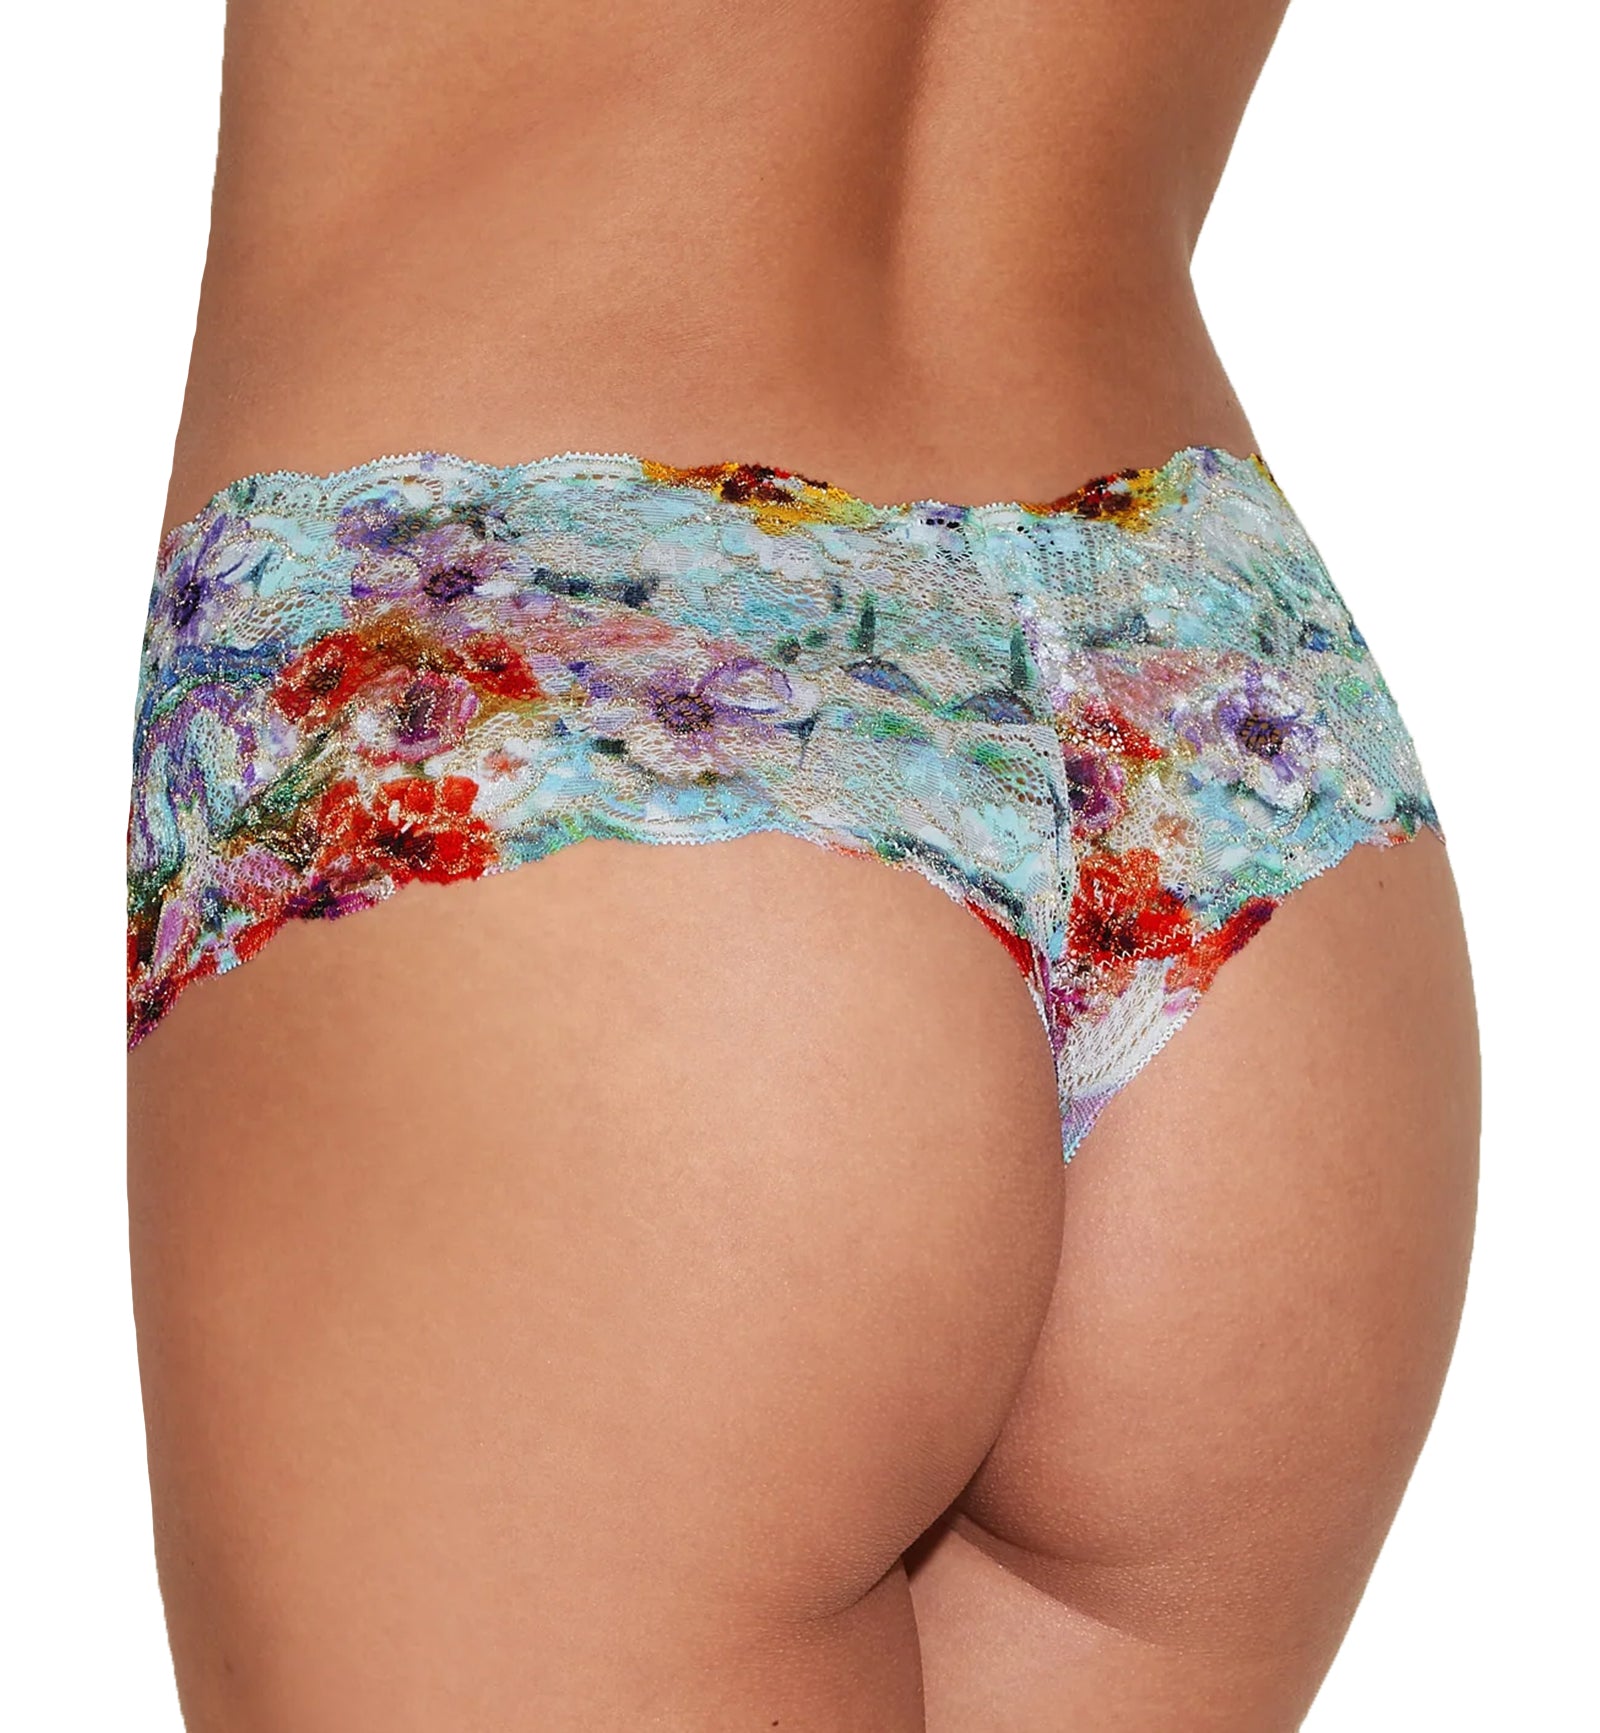 Cosabella NSN Printed Comfie Thong (NEVEP0343),S/M,Floral Beauty - Floral Beauty,S/M